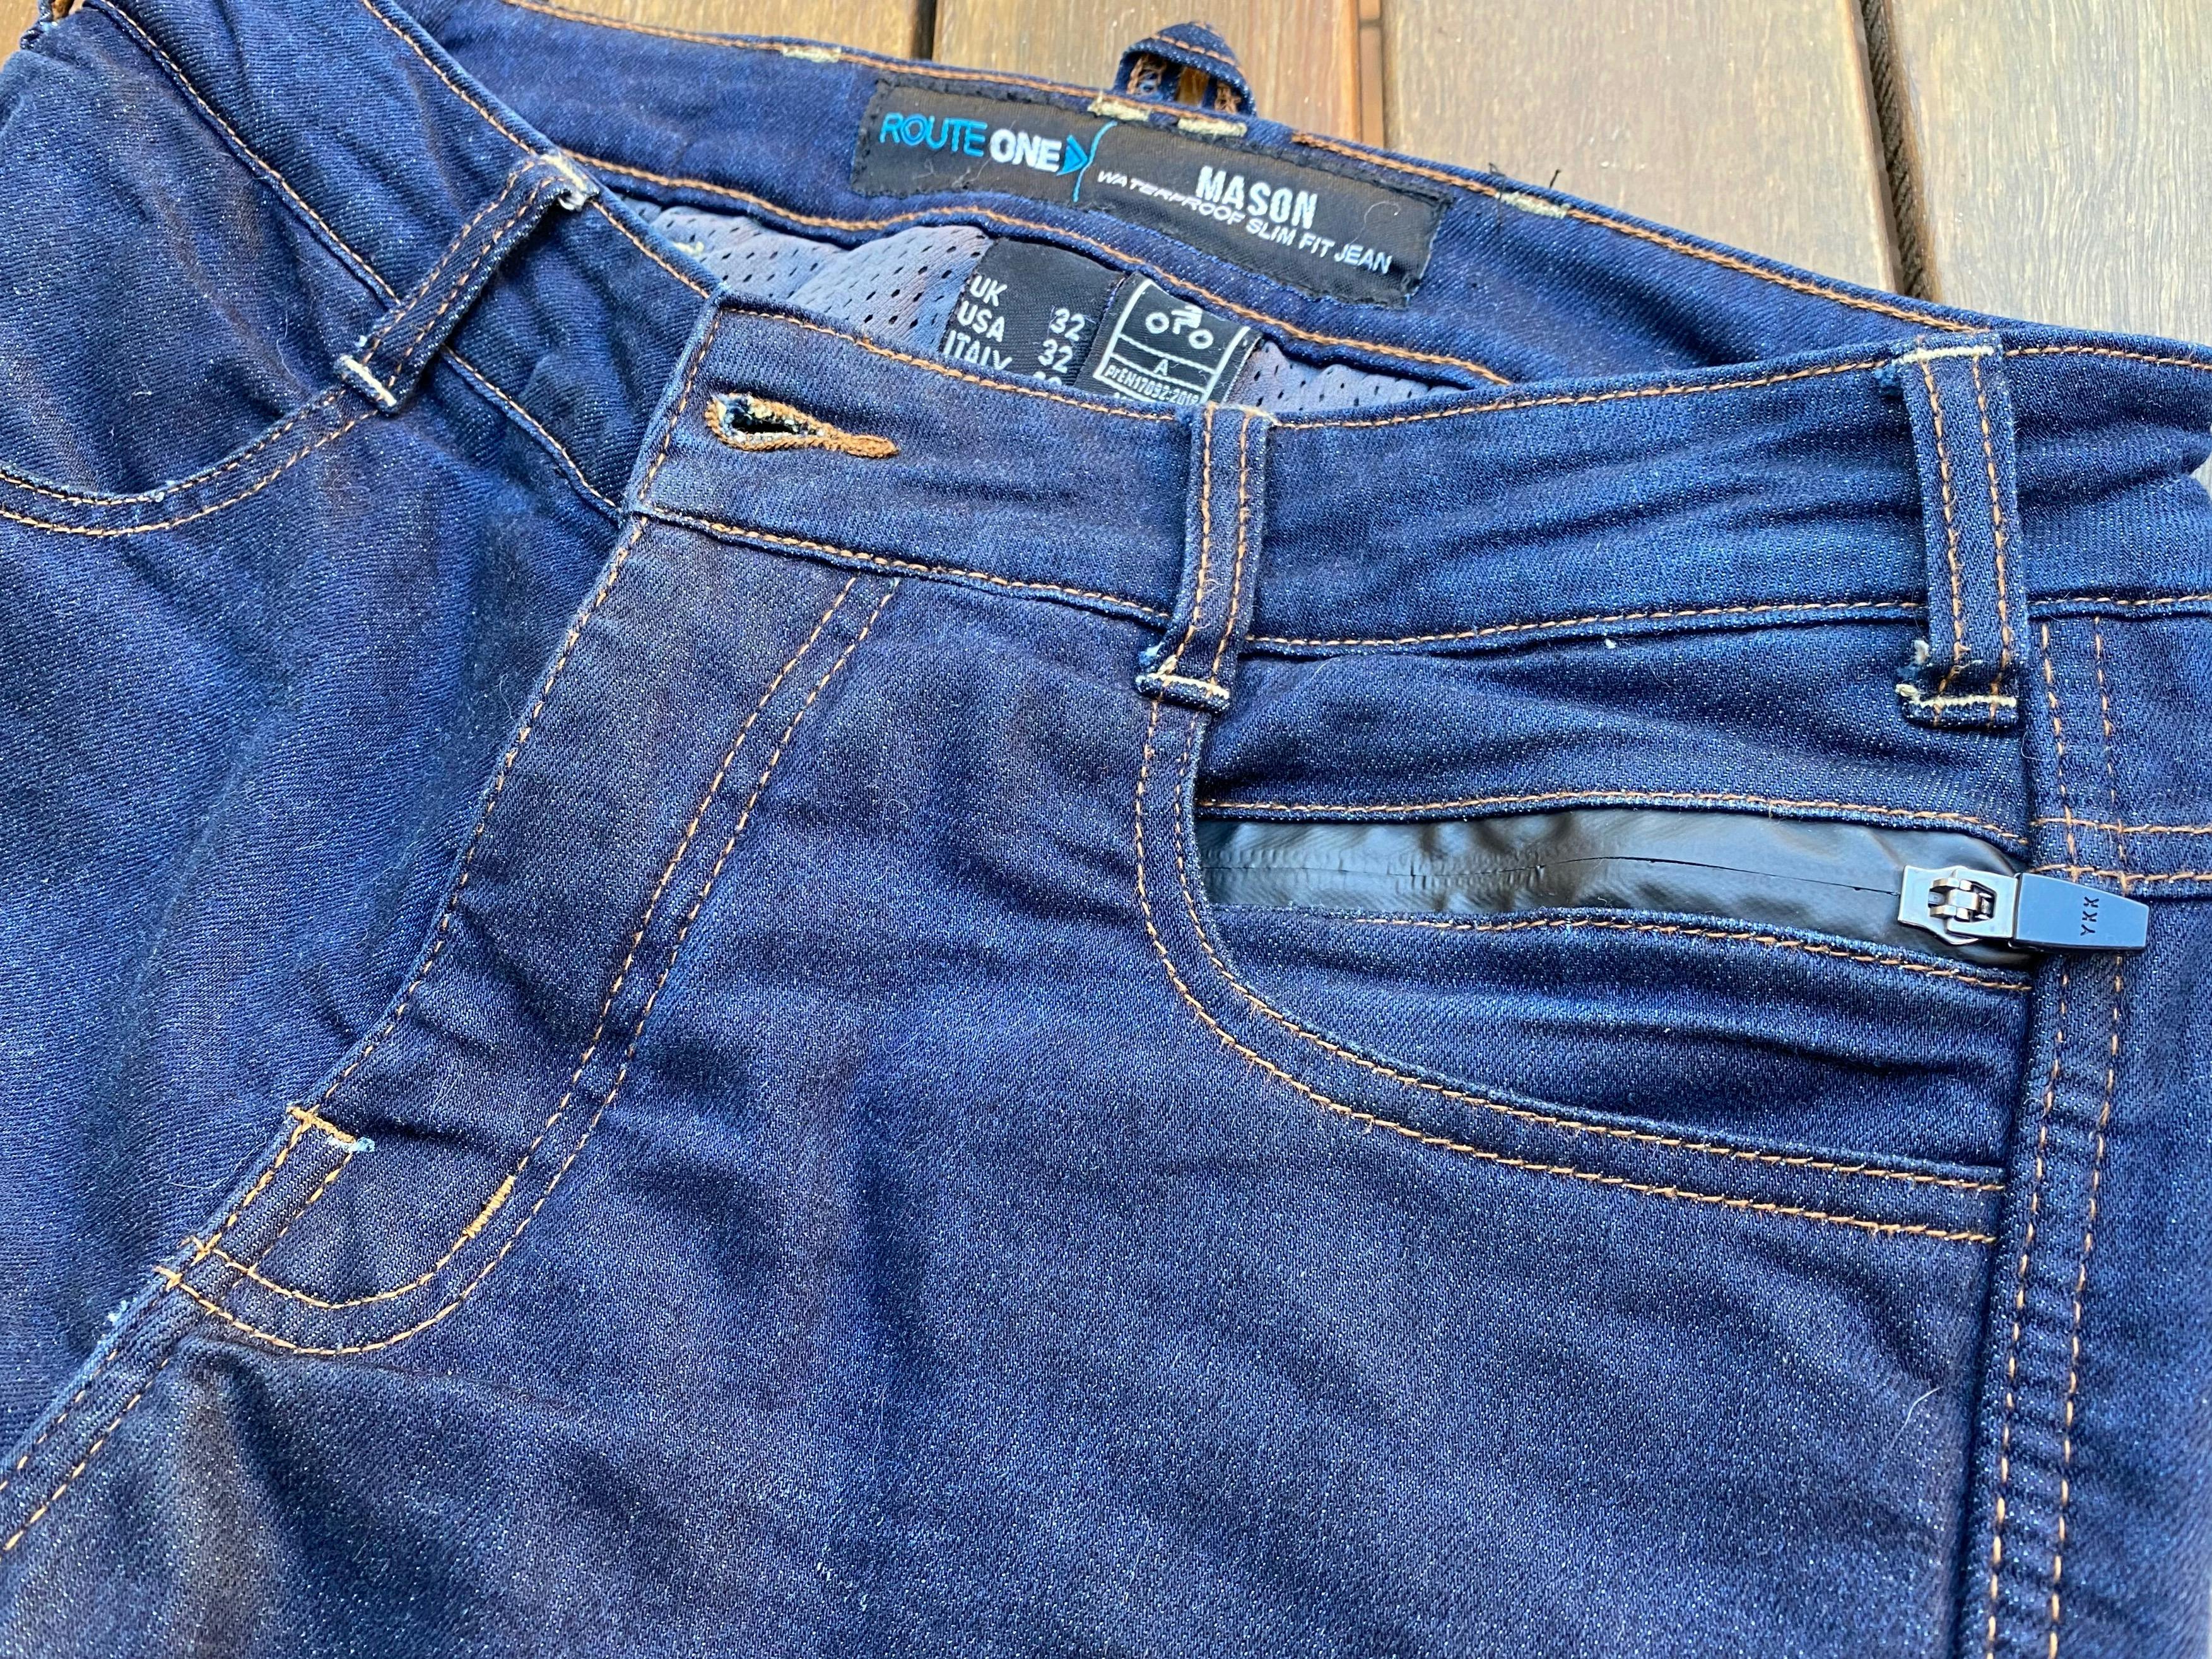 Heat welded tape to create a waterproof pocket on the front of a pair of blue merlin mason jeans